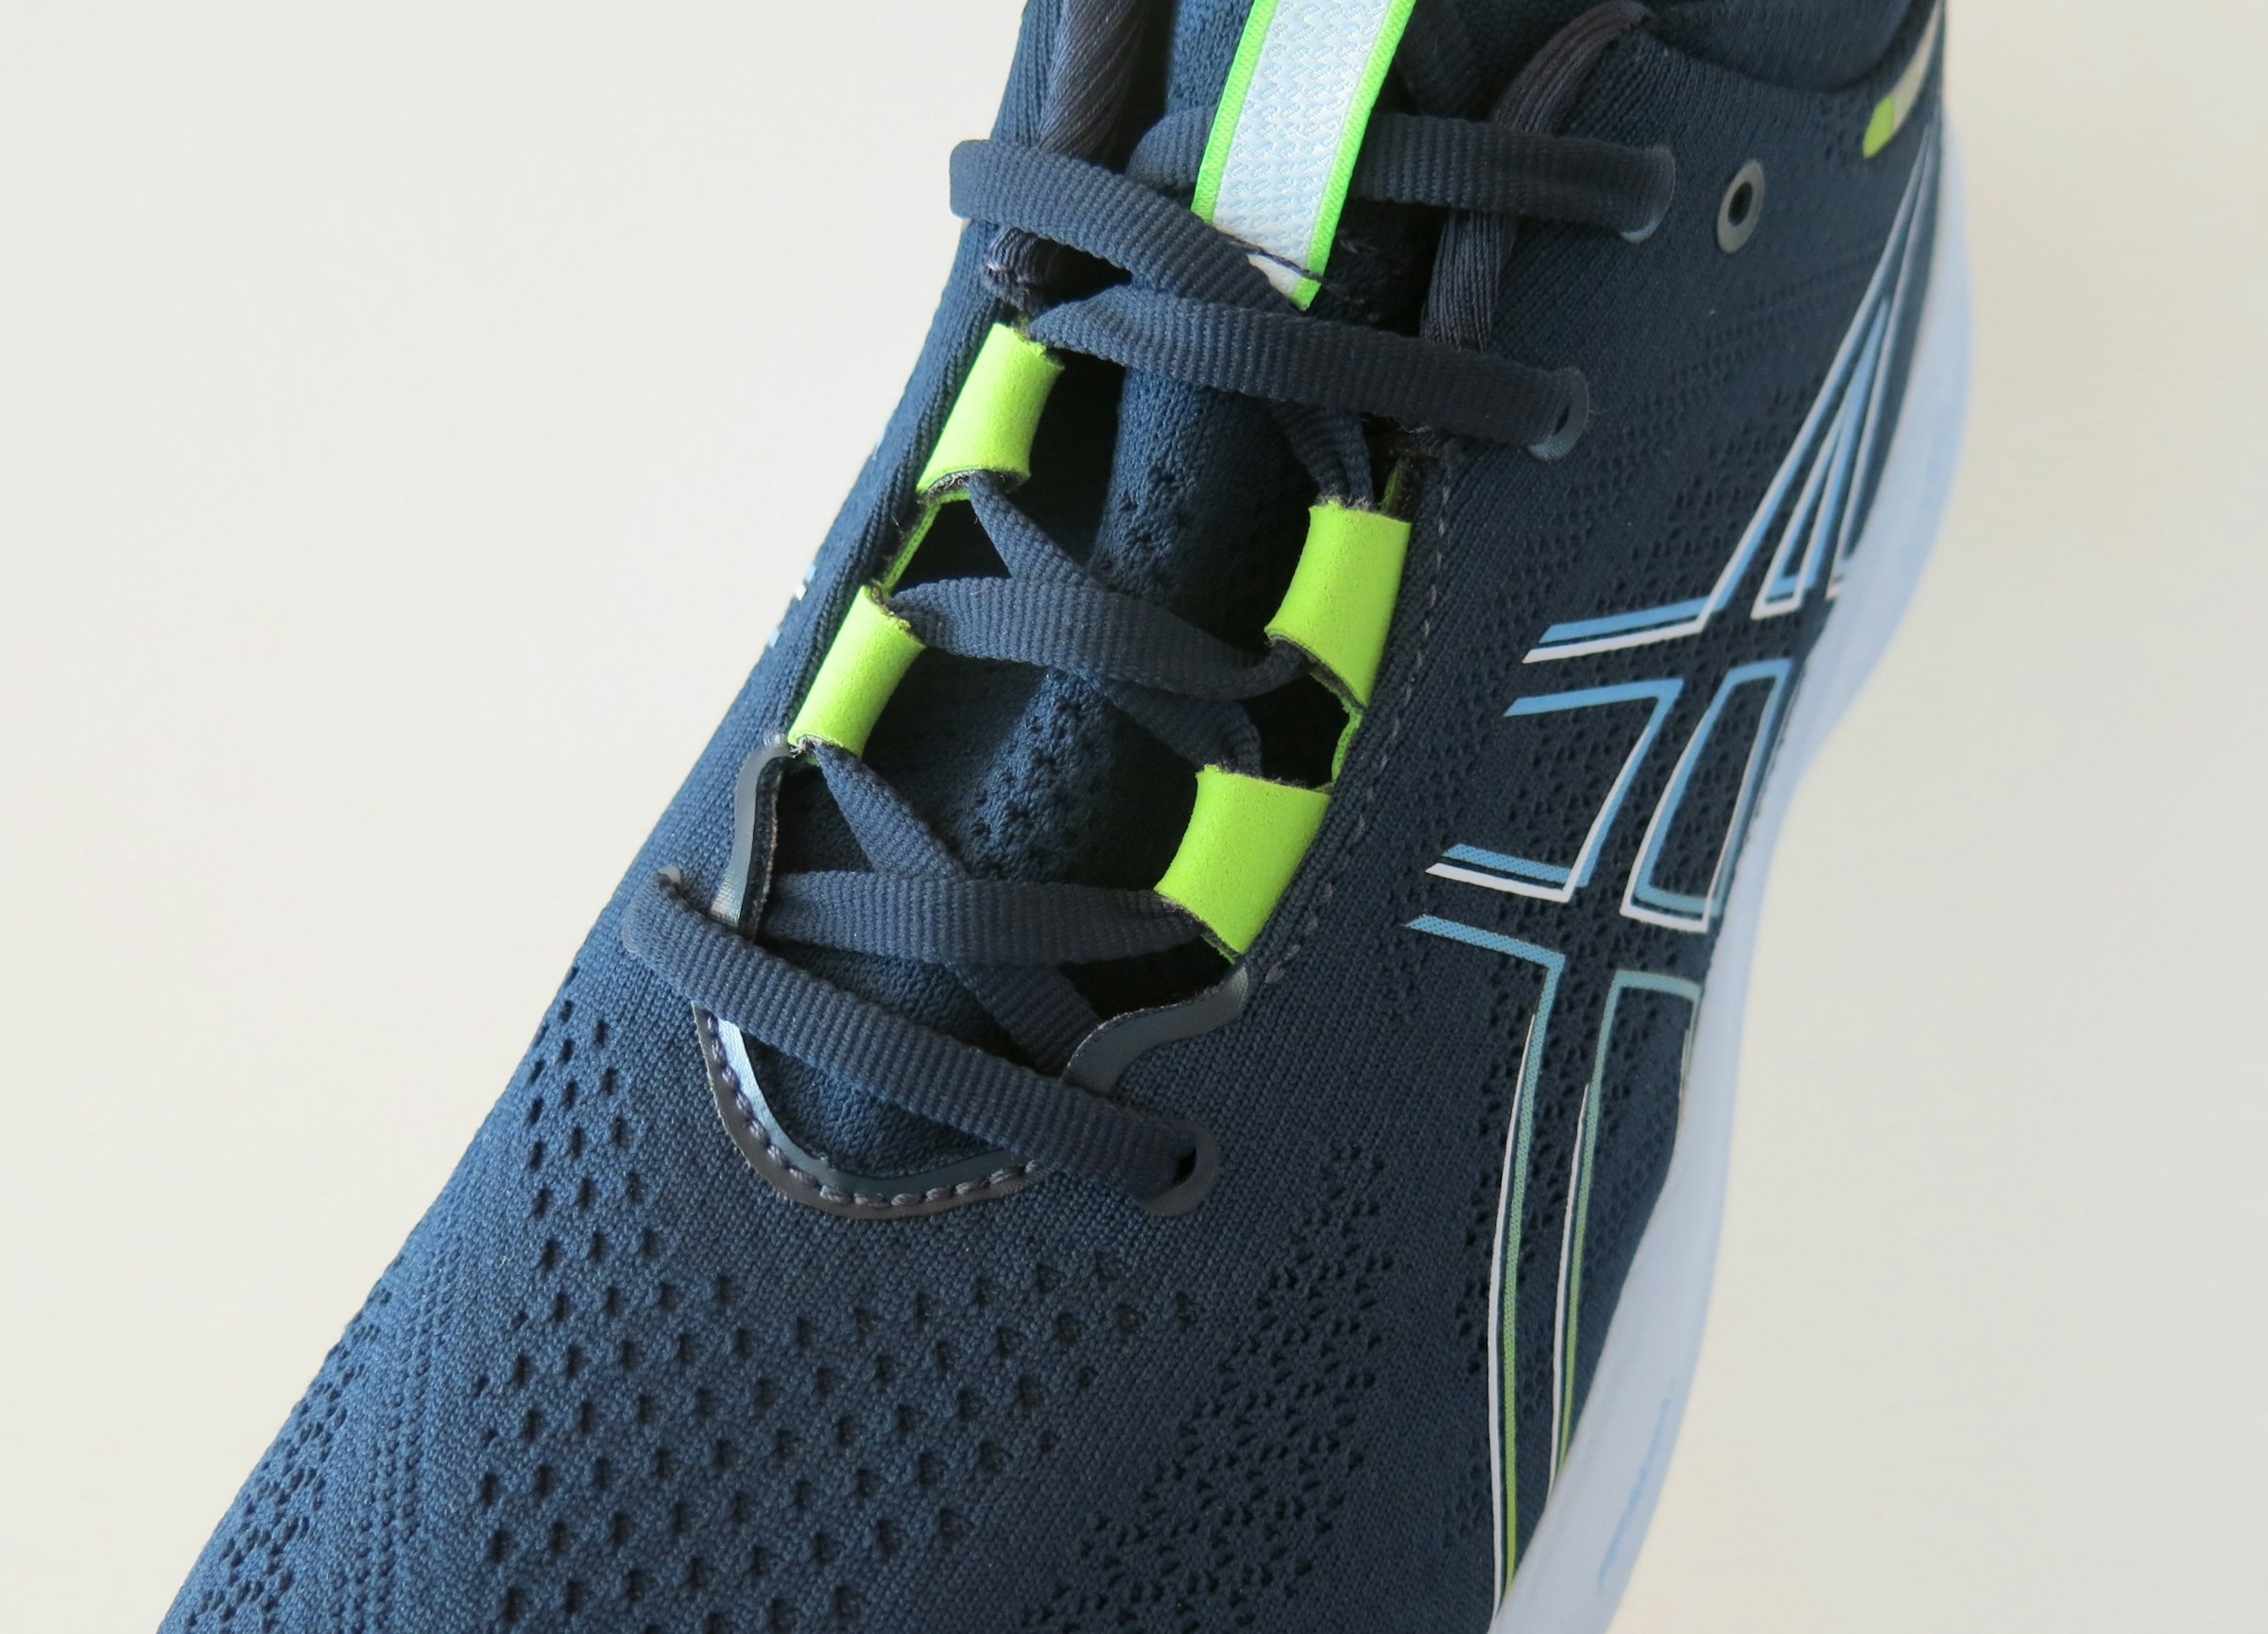 The design of the shoelace holes has been changed, making it effective to lift up the upper